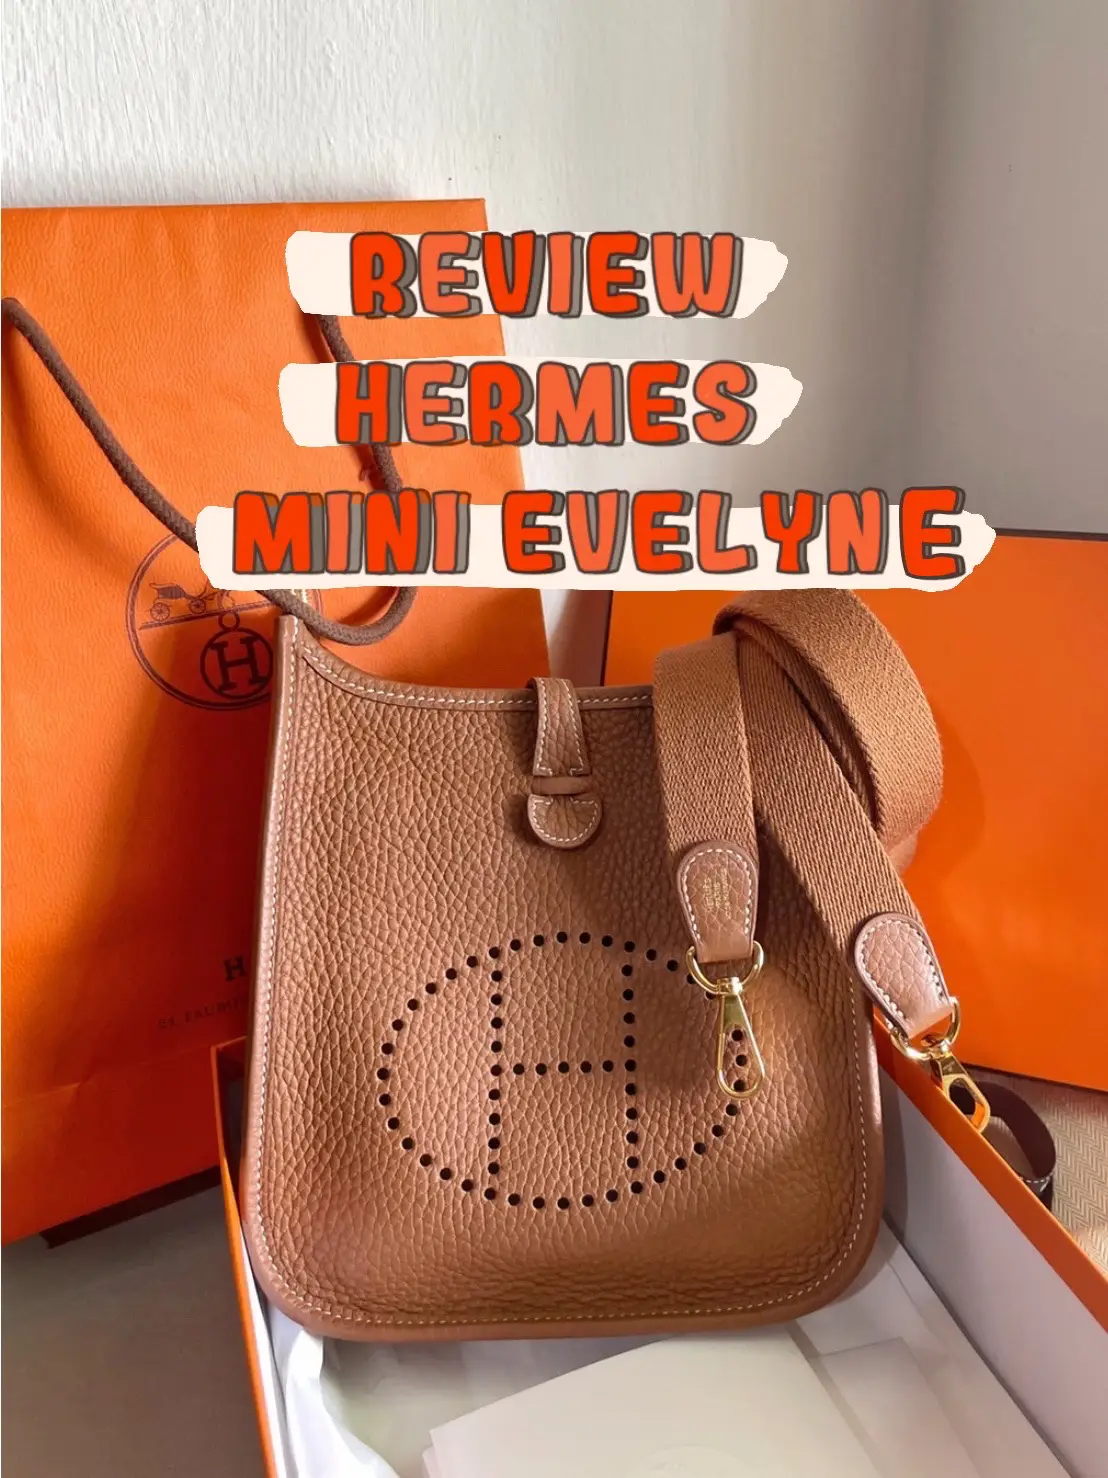 Unboxing Hermes Evelyne  Leather Bag Review, First Look 